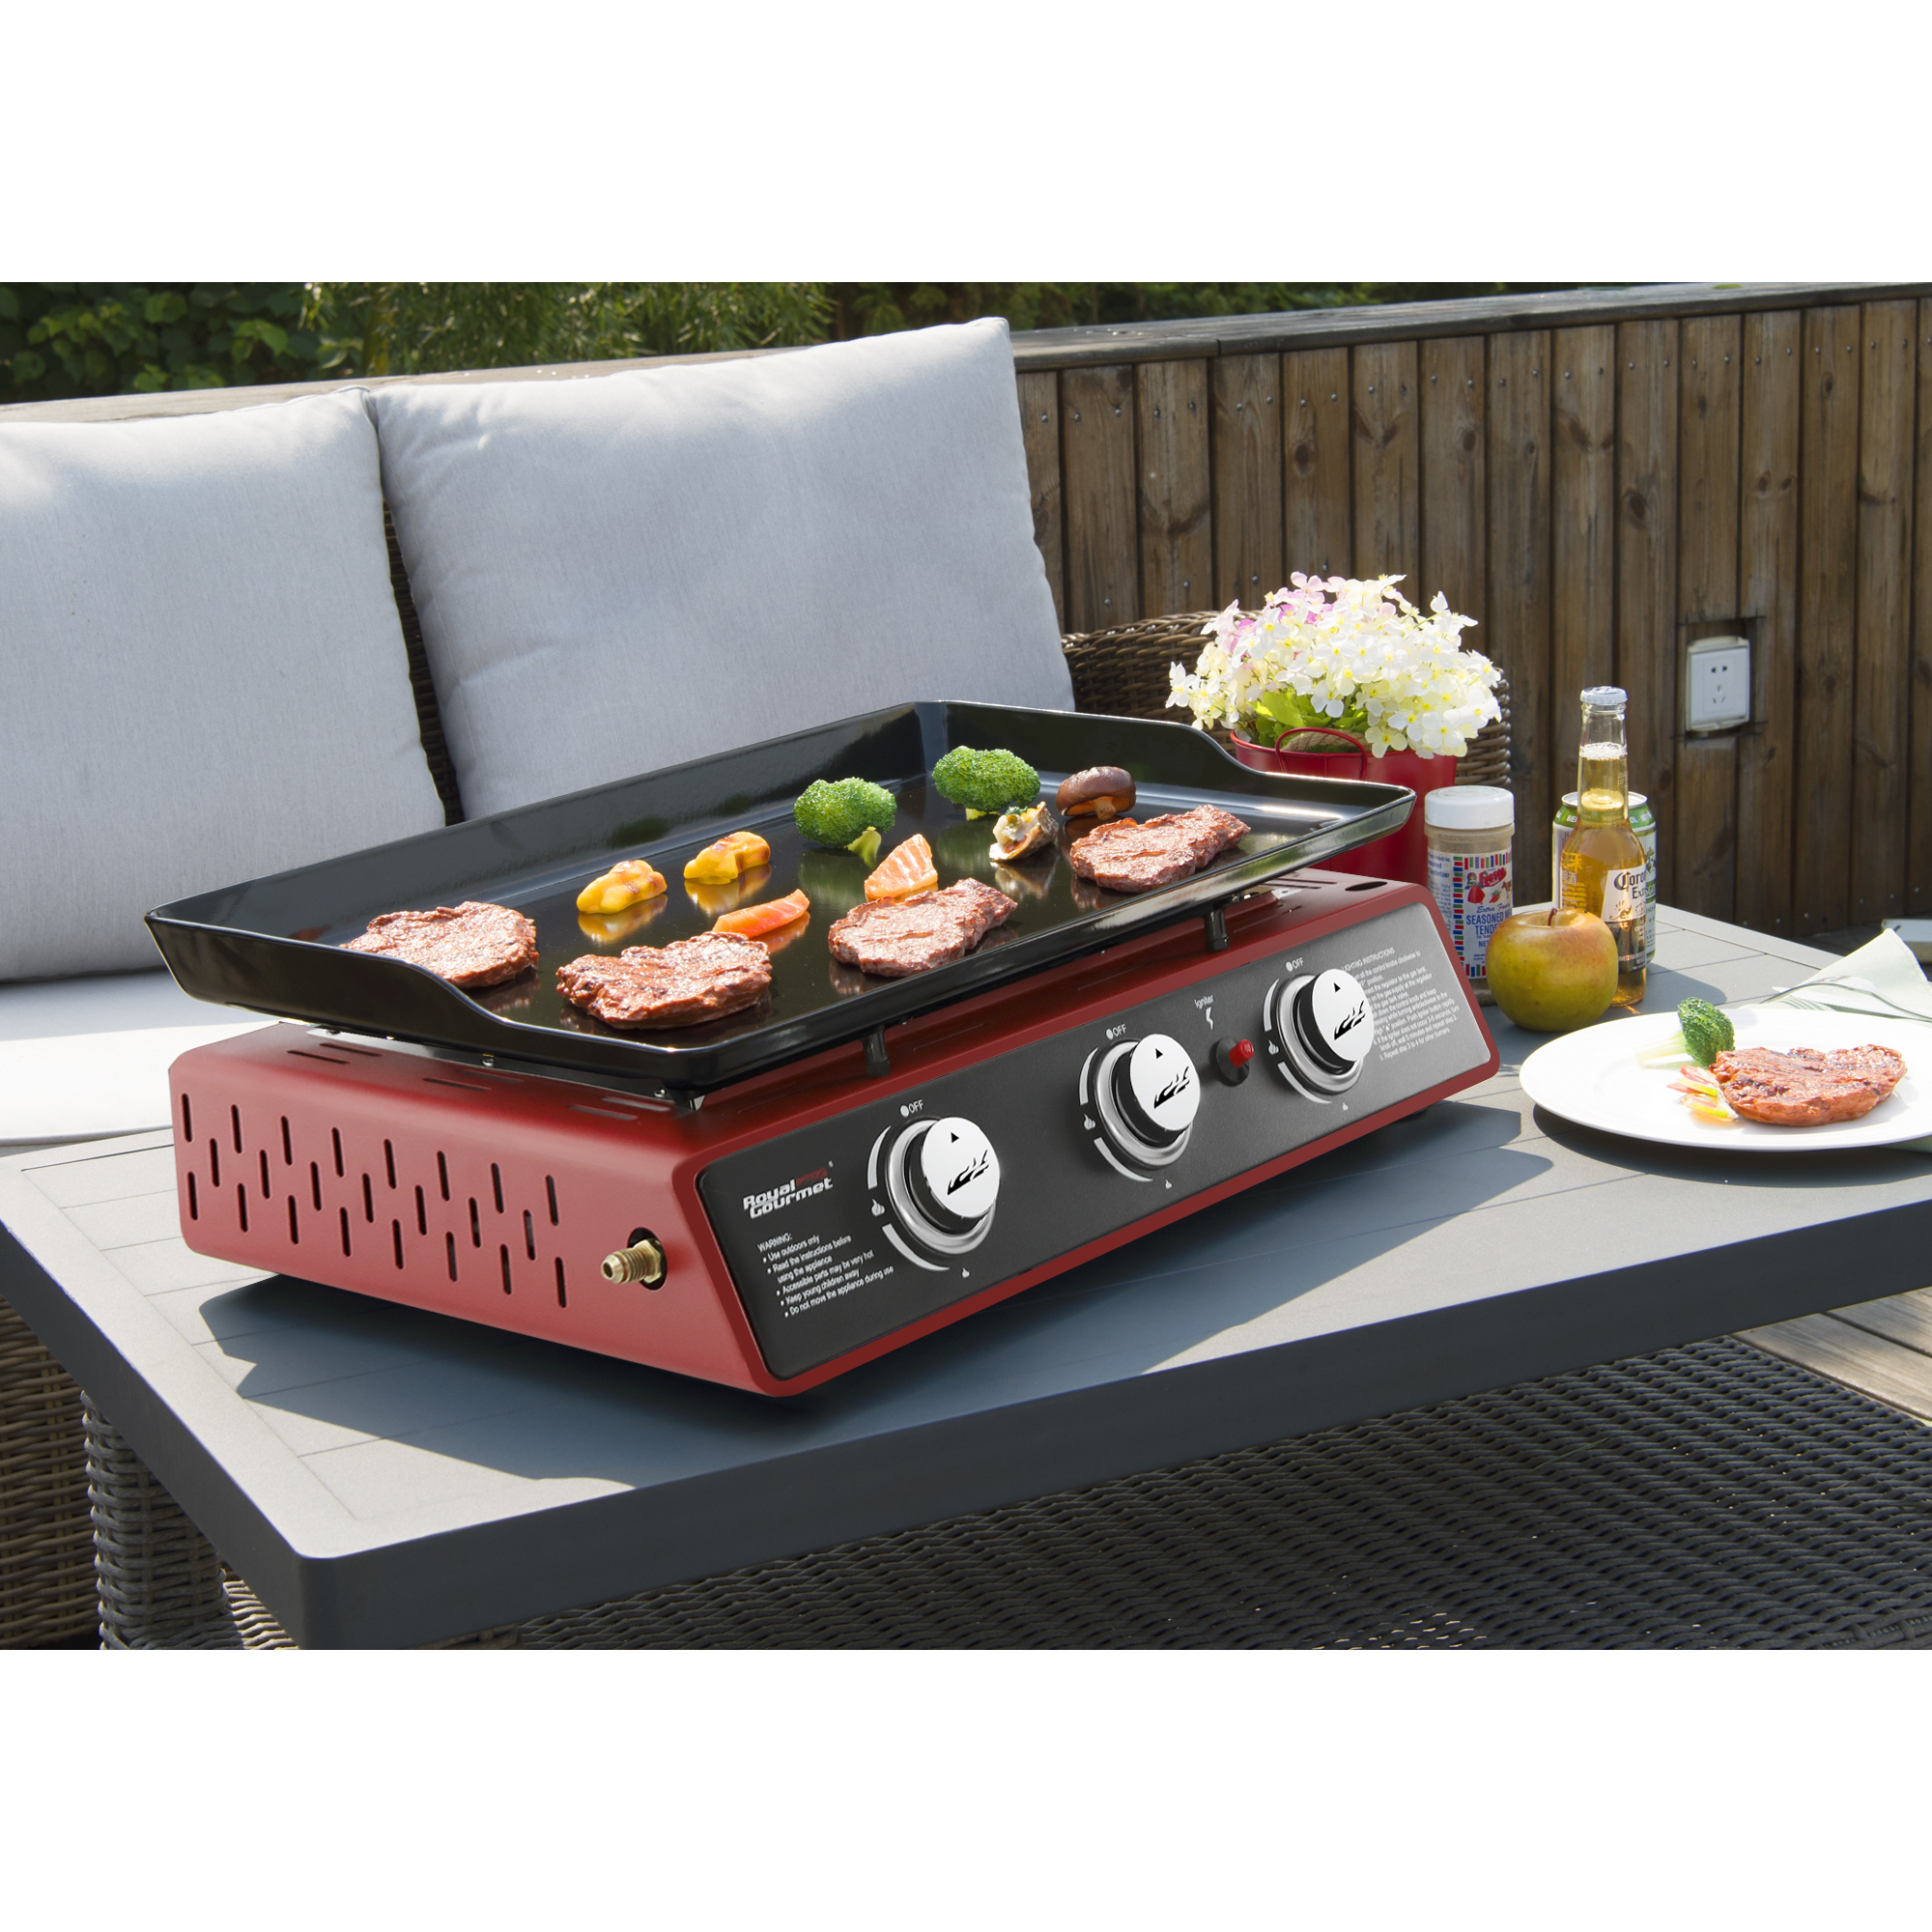 Royal Gourmet 3 Burner PD1301R Portable Tabletop 24" Gas Grill - image 5 of 6